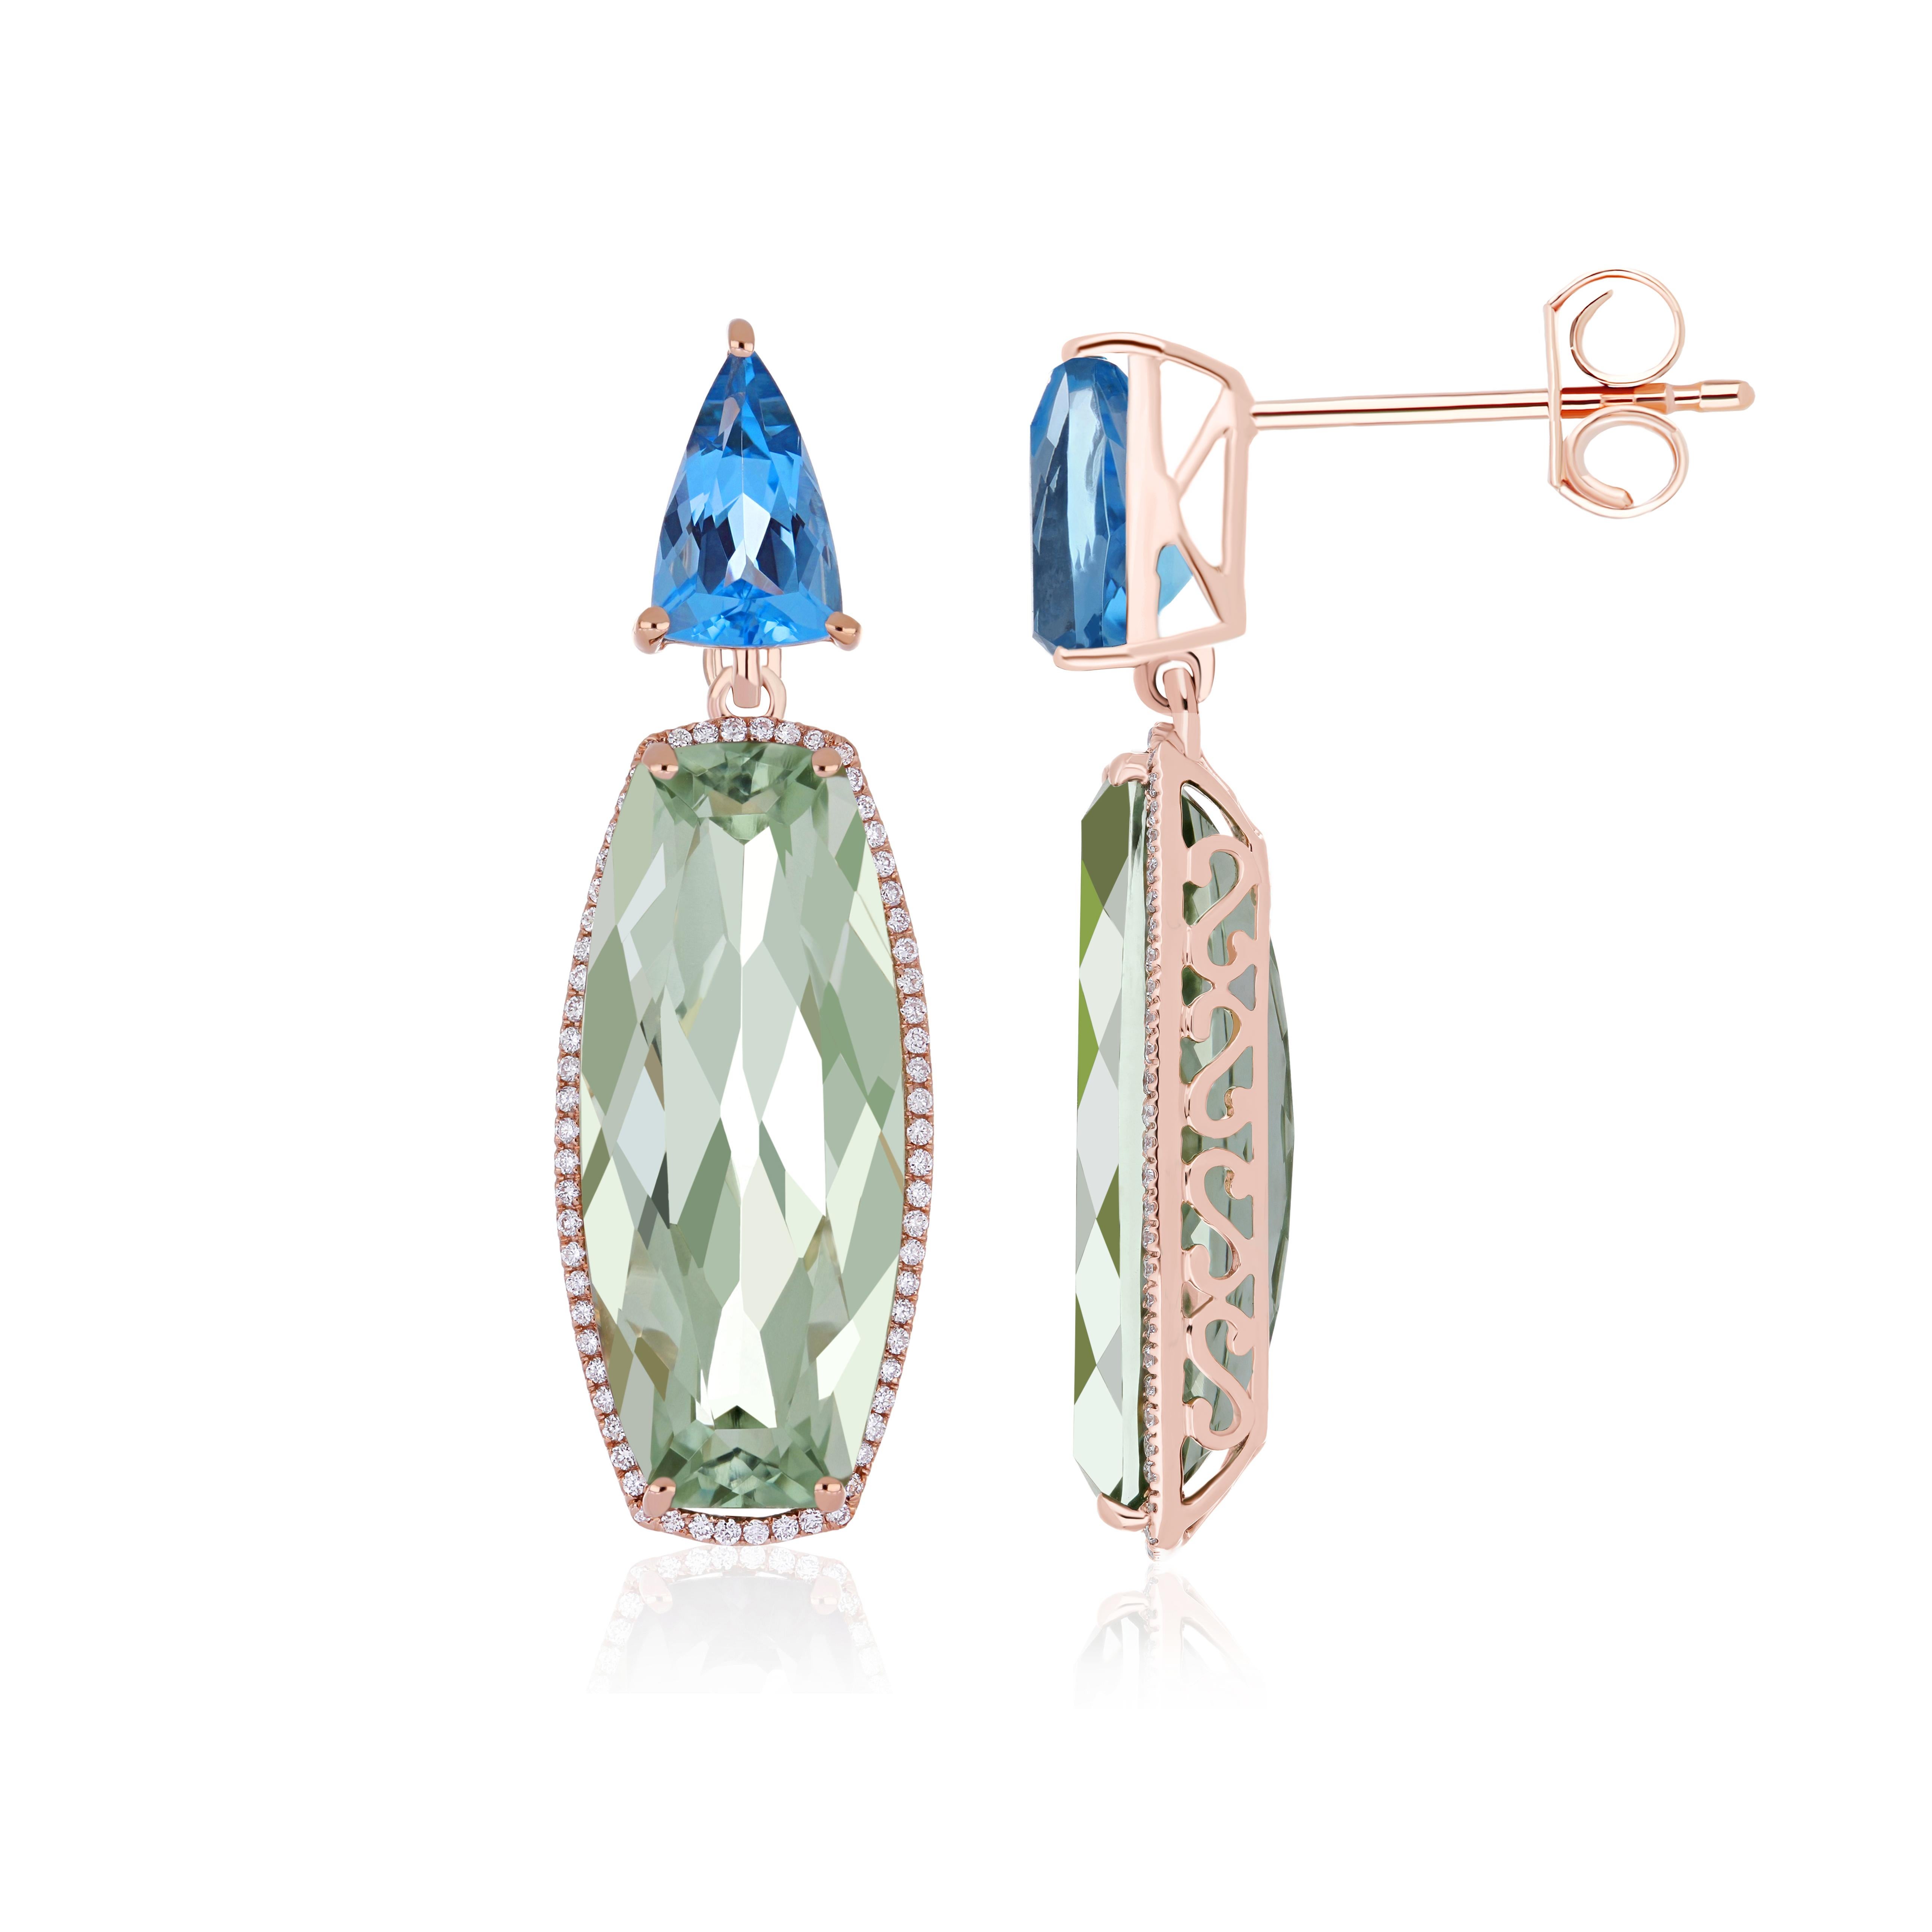 Elegant and Exquisitely Detailed 14Karat Rose Gold Earring in Cushion Sharp Corner Mint Quartz weighing approx. 13.05Cts, Swiss Blue Topaz in Faceted and Trillion Shape Weighing approx. 2.08Cts and Micro prove Set Diamond weighing 0.30Cts